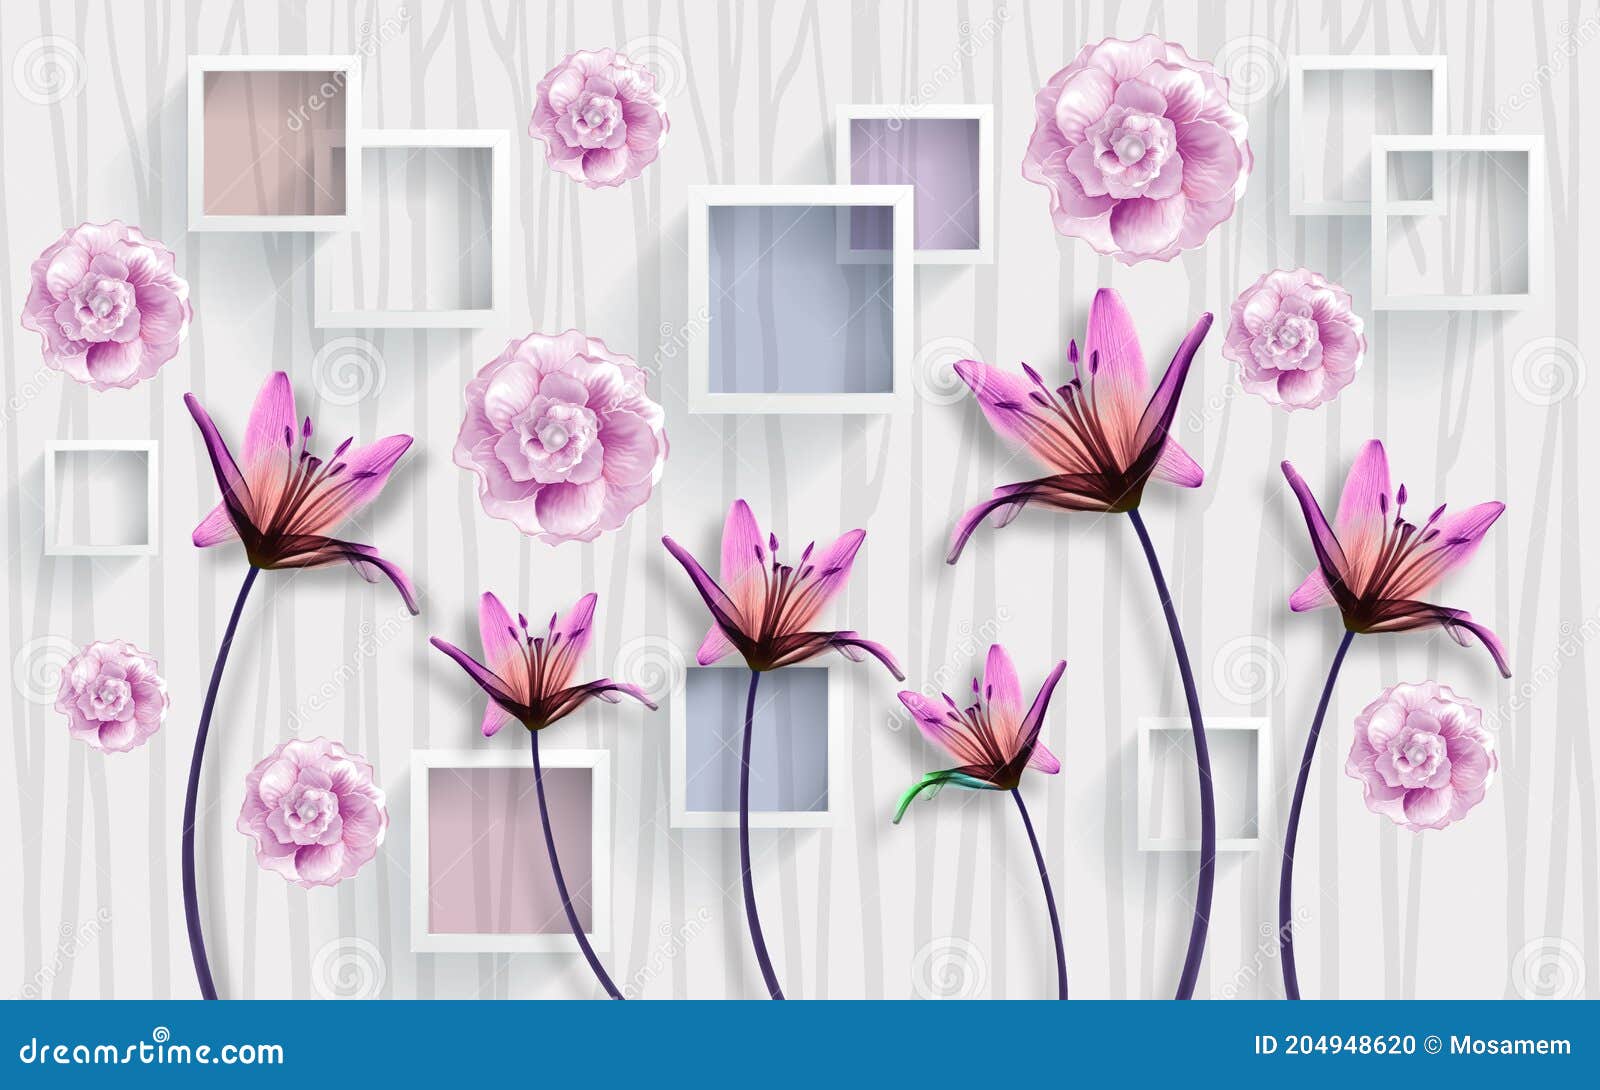 Purple Roses Floral Design Photo Wallpaper Wall Mural Fleece Easy-Install Paper